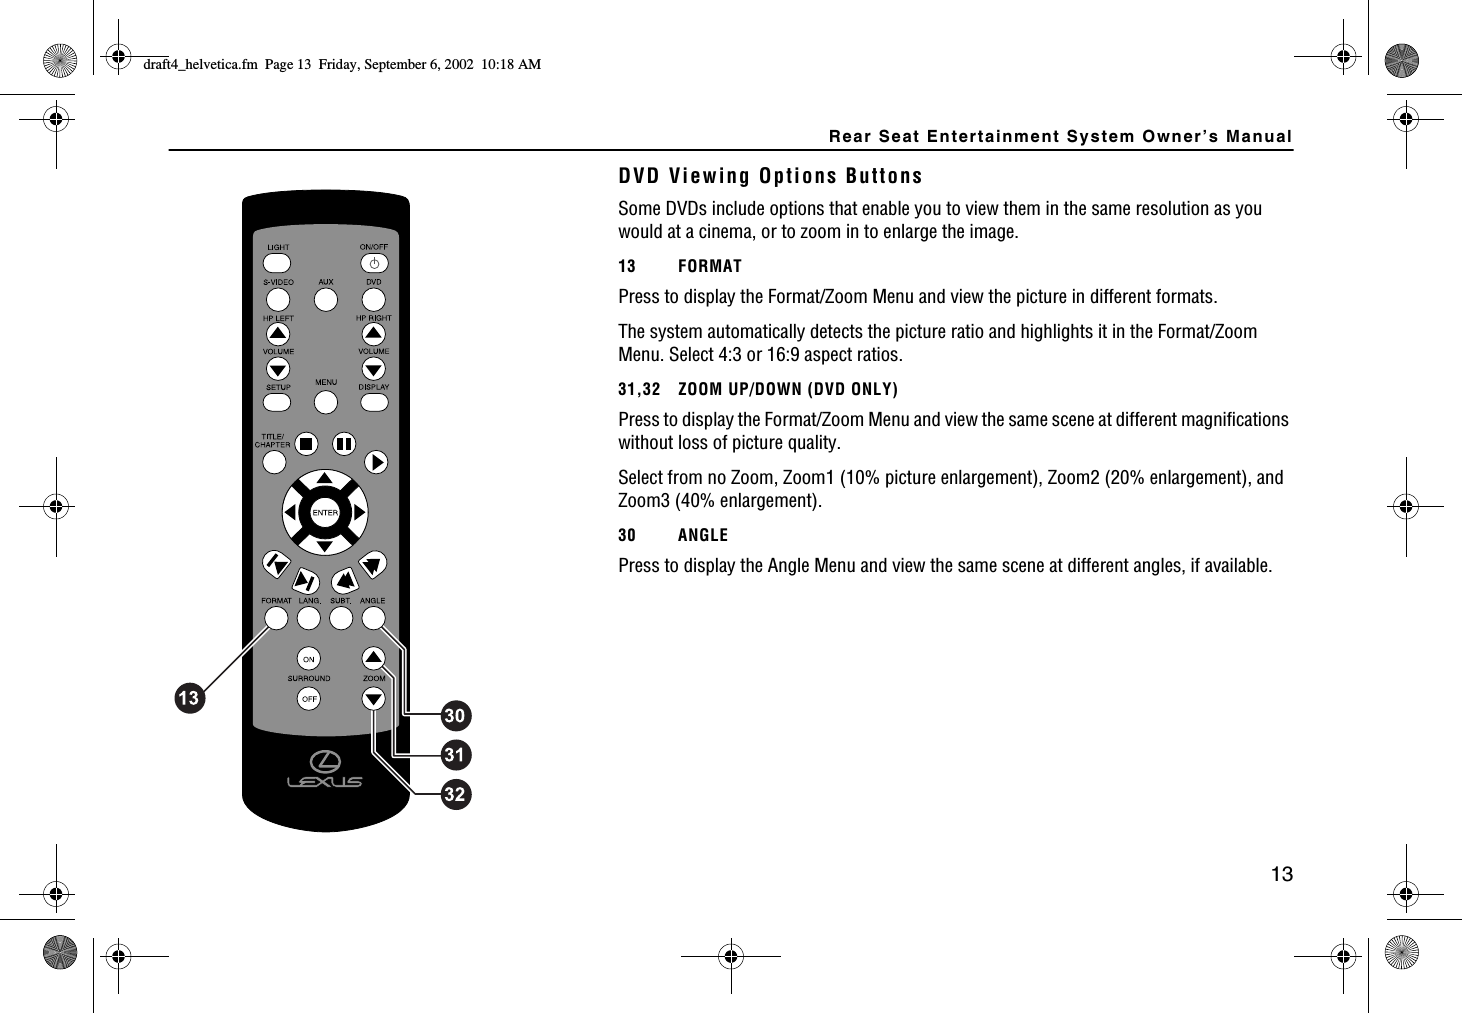 Rear Seat Entertainment System Owner’s Manual13DVD Viewing Options ButtonsSome DVDs include options that enable you to view them in the same resolution as you would at a cinema, or to zoom in to enlarge the image. 13 FORMATPress to display the Format/Zoom Menu and view the picture in different formats. The system automatically detects the picture ratio and highlights it in the Format/Zoom Menu. Select 4:3 or 16:9 aspect ratios.31,32 ZOOM UP/DOWN (DVD ONLY)Press to display the Format/Zoom Menu and view the same scene at different magnifications without loss of picture quality. Select from no Zoom, Zoom1 (10% picture enlargement), Zoom2 (20% enlargement), and Zoom3 (40% enlargement).30 ANGLEPress to display the Angle Menu and view the same scene at different angles, if available.FTCHVAJGNXGVKECHO2CIG(TKFC[5GRVGODGT#/